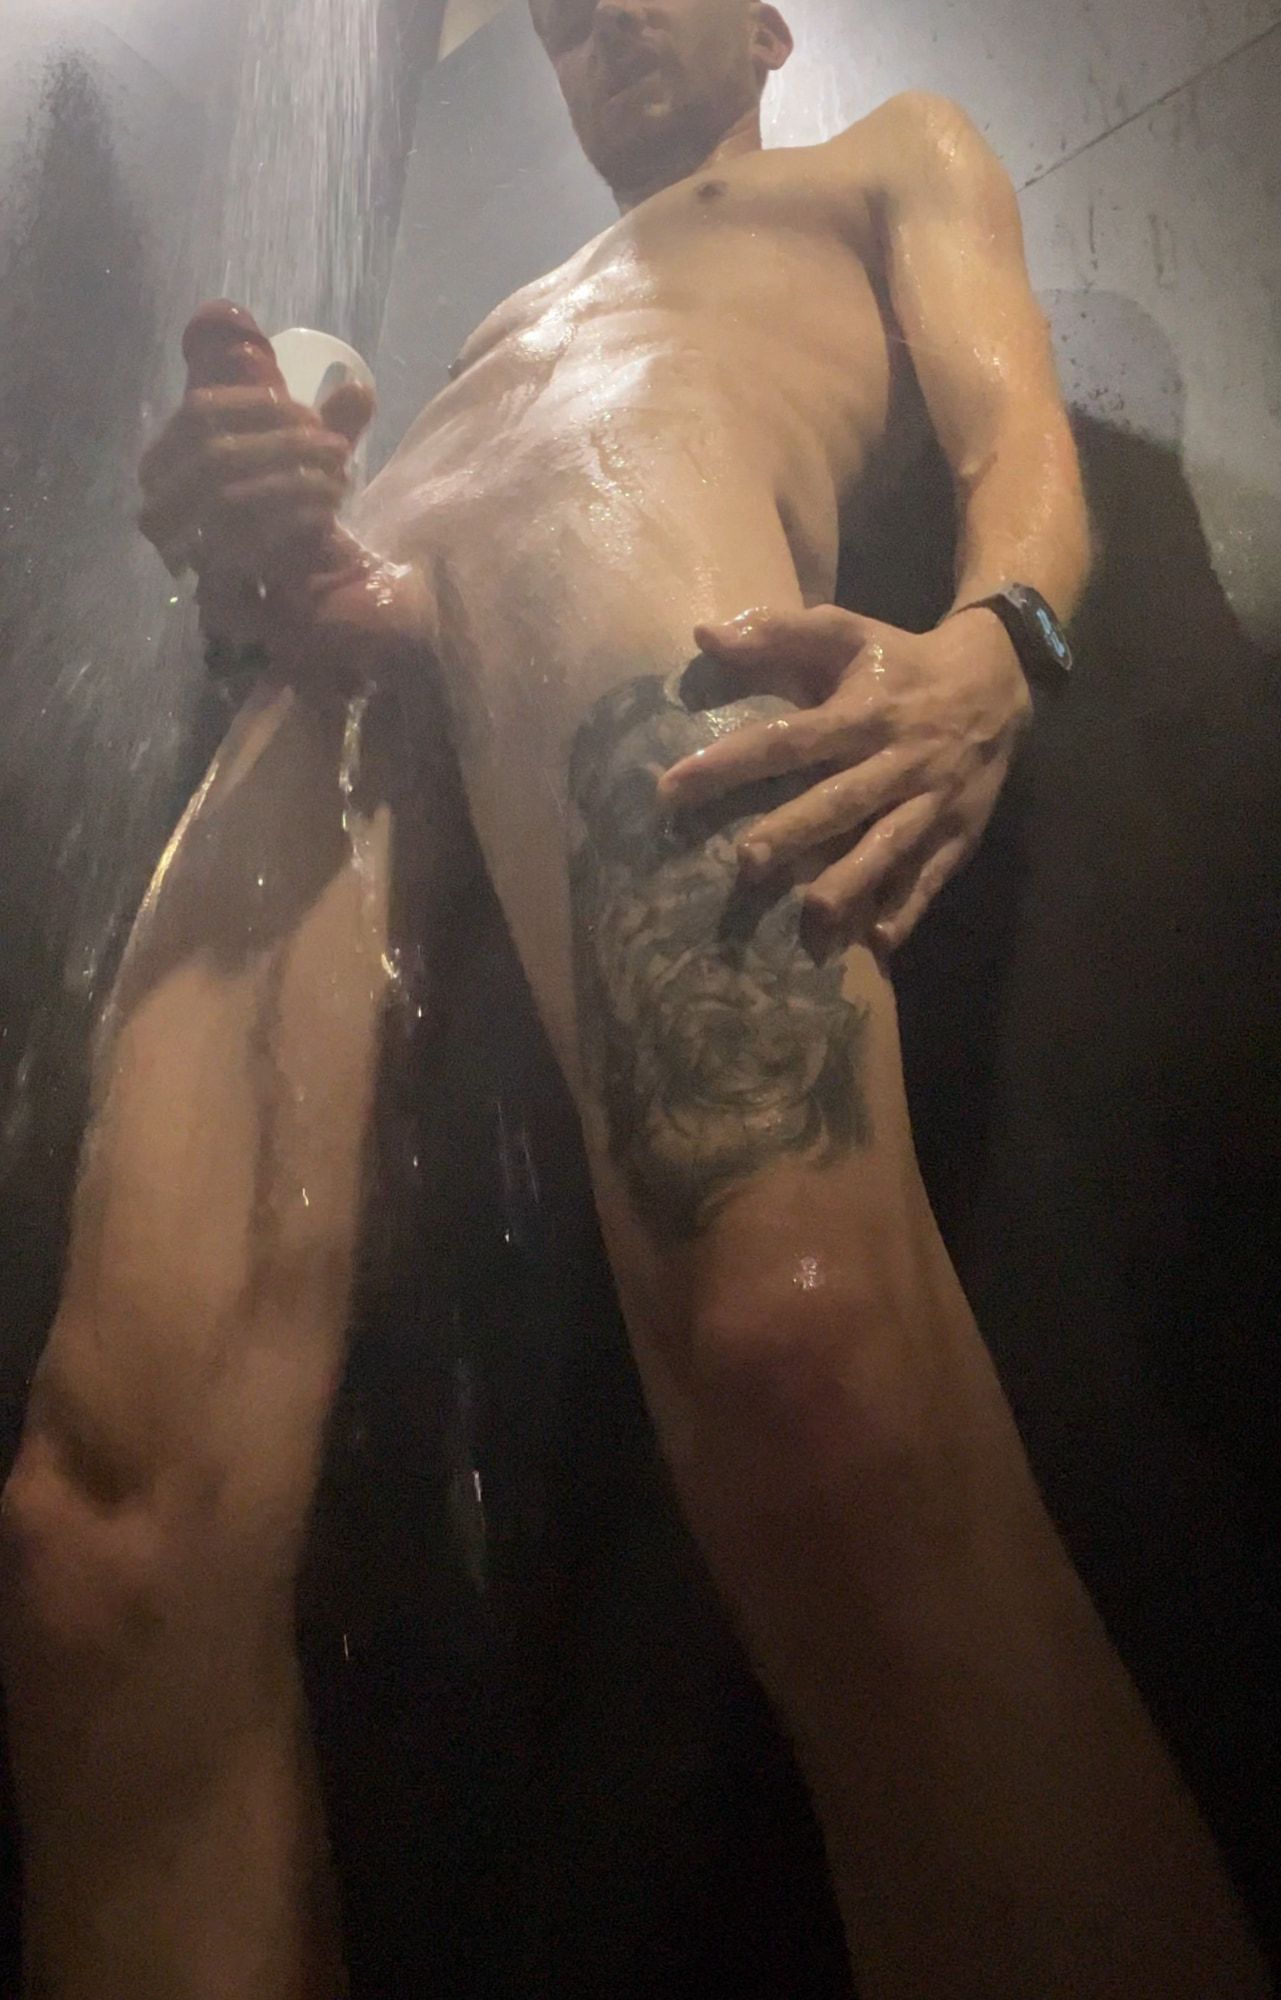 Shots playing on public showers at the gym #11